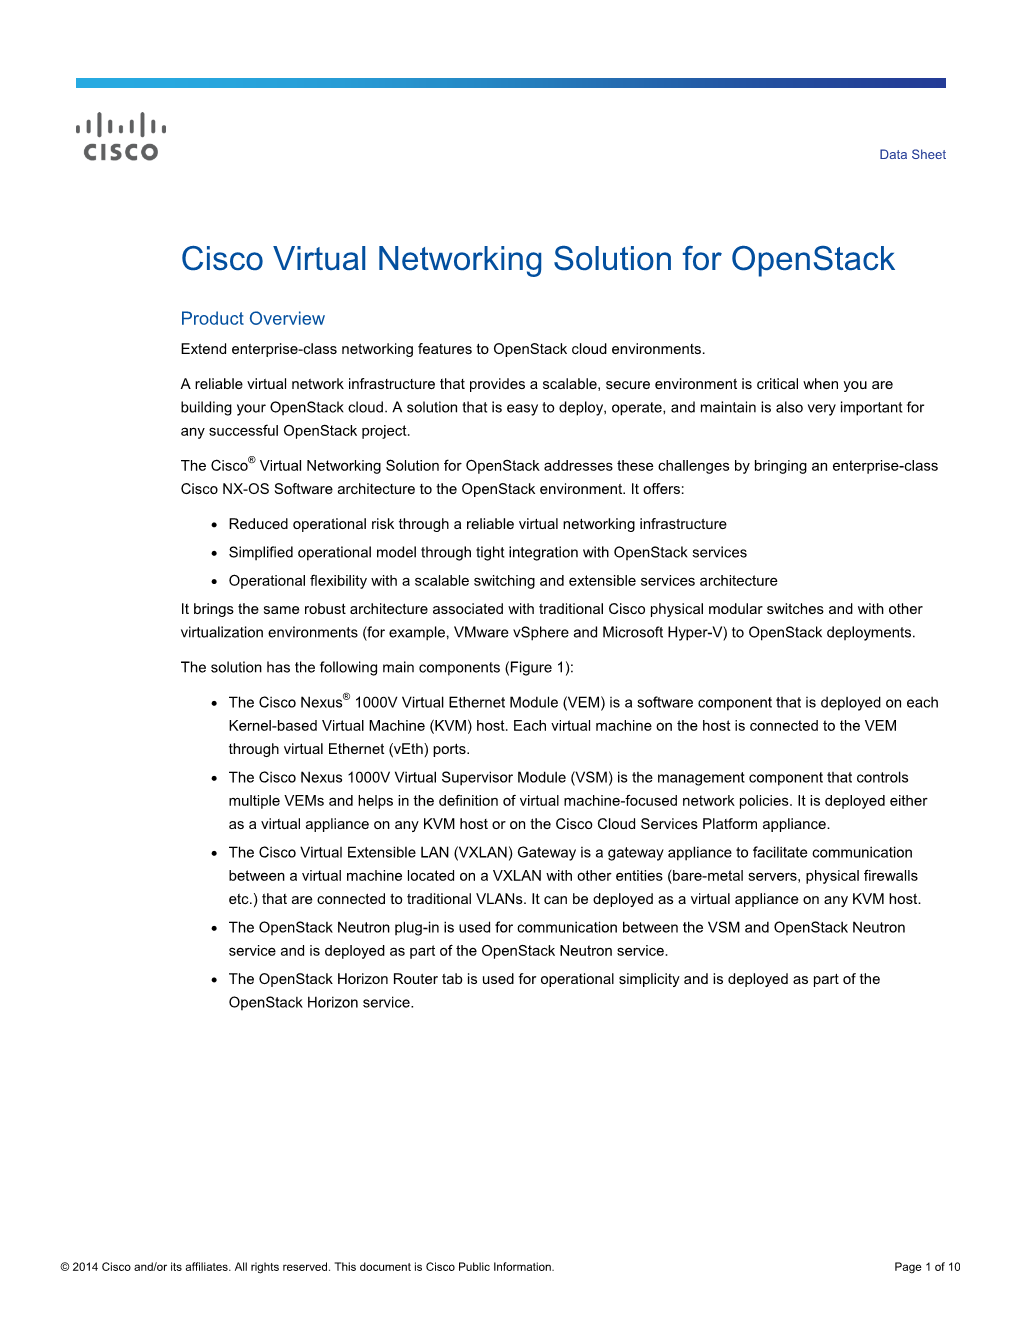 Cisco Virtual Networking Solution for Openstack Data Sheet